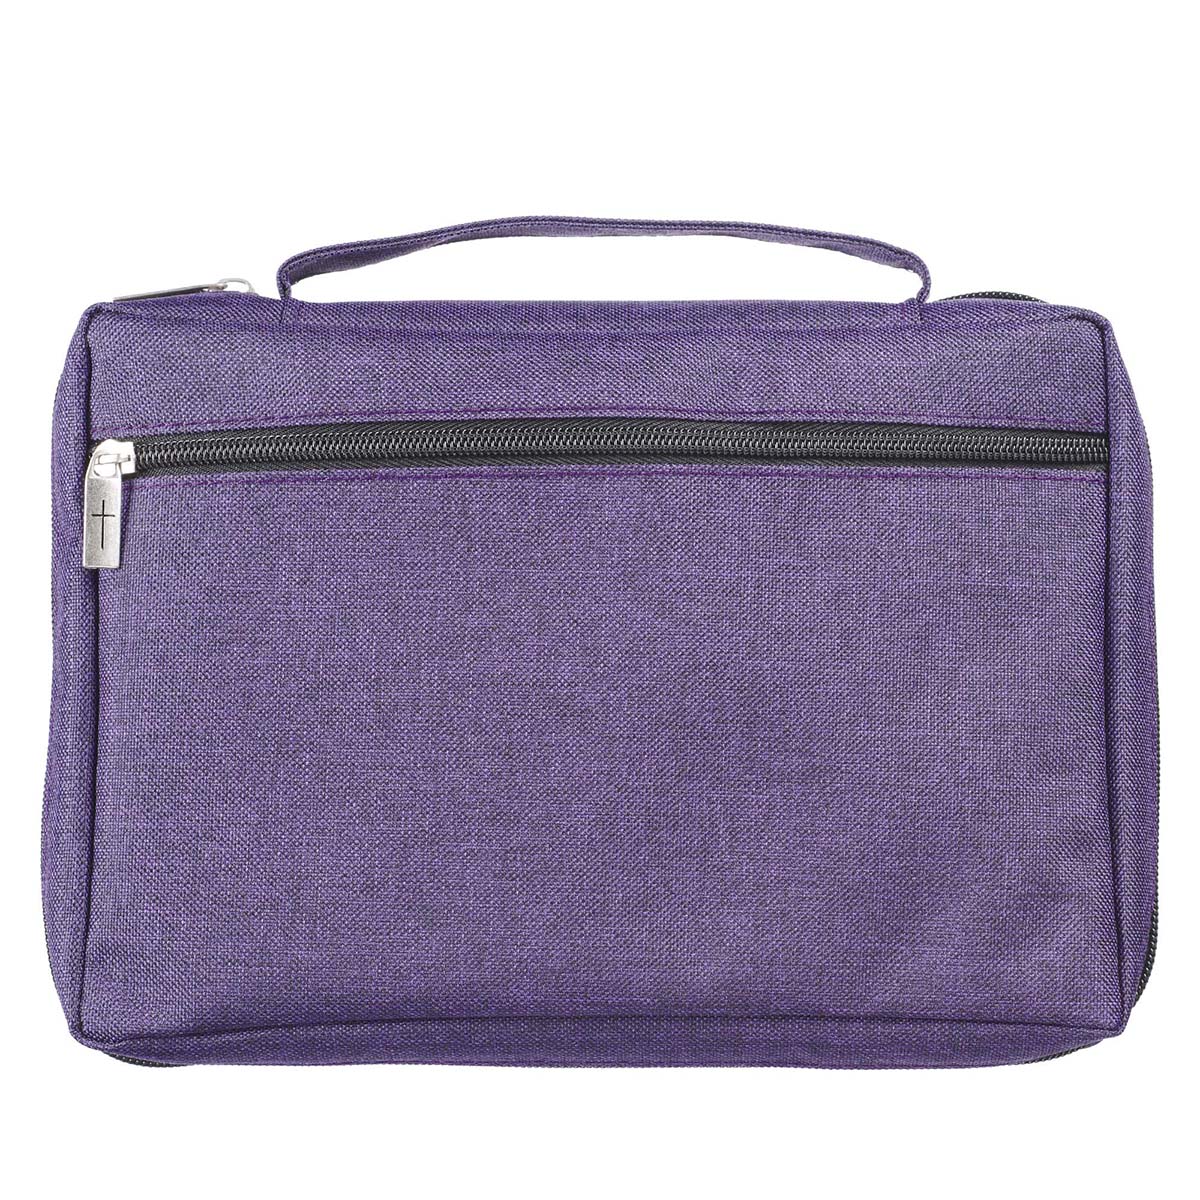 Purple Poly-Canvas Value Bible Cover with Fish Badge - KJV Bibles